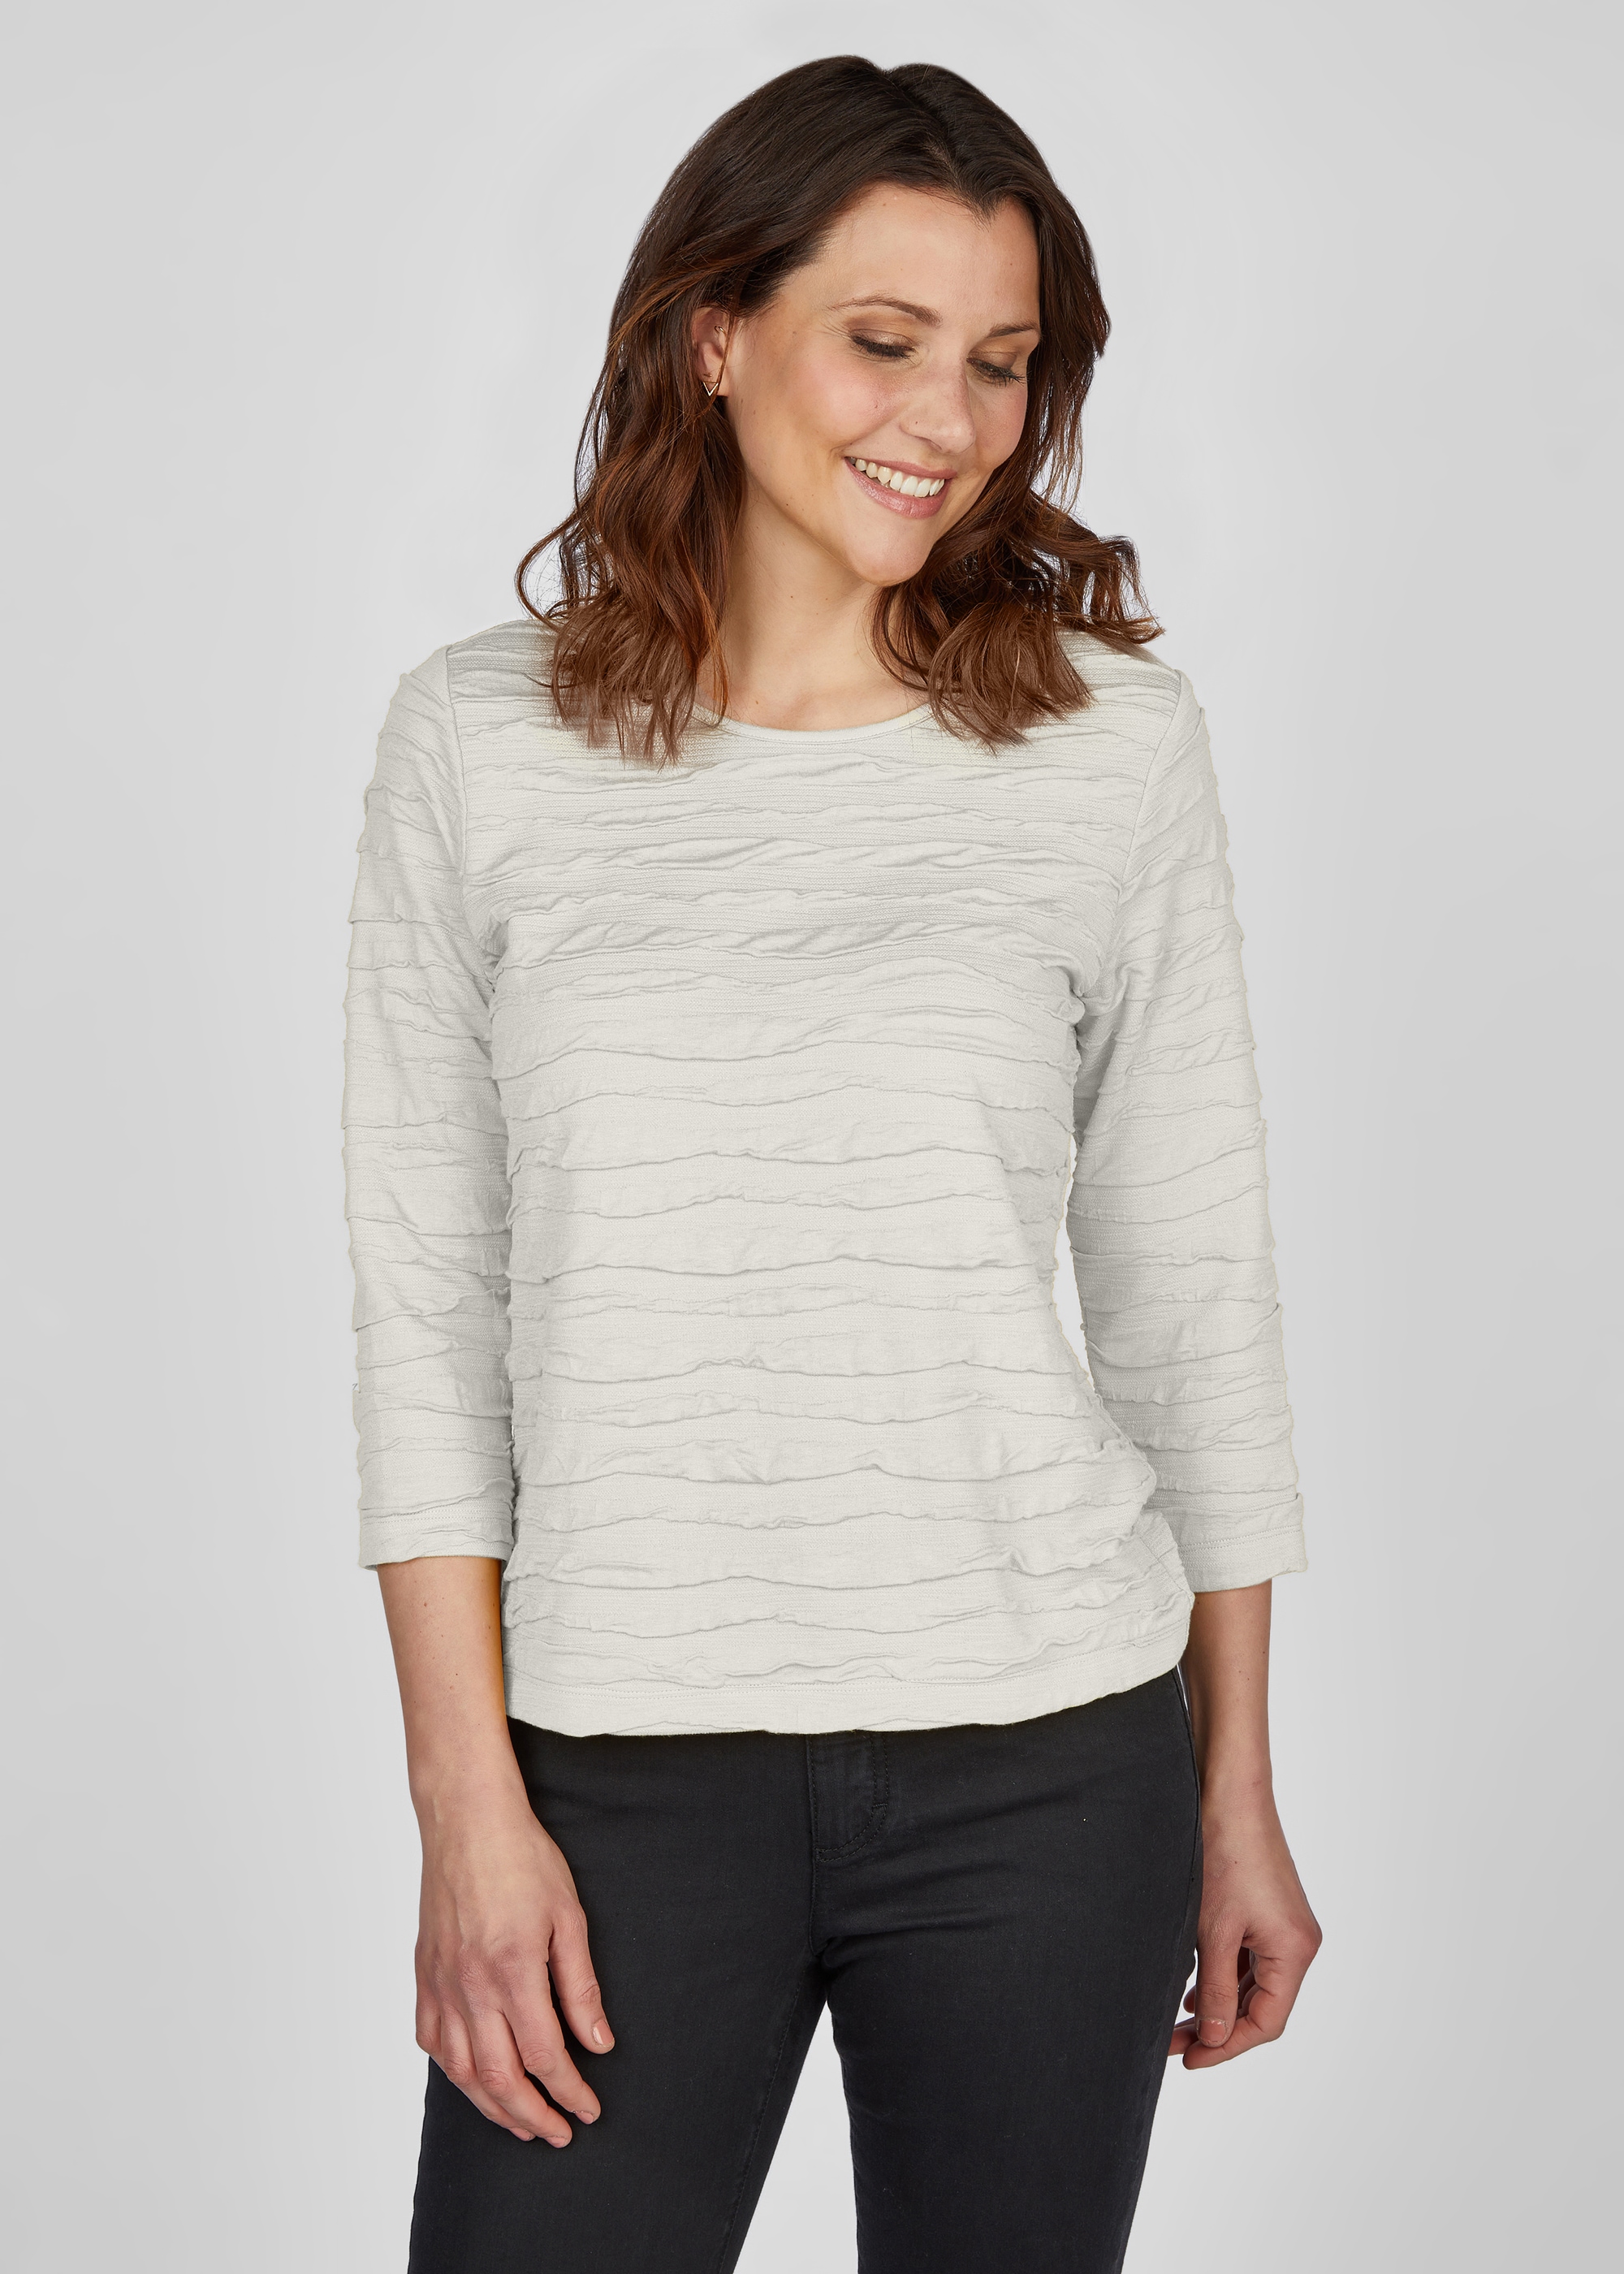 Rabe in bei 3/4-Arm-Shirt, ♕ Unifarbe